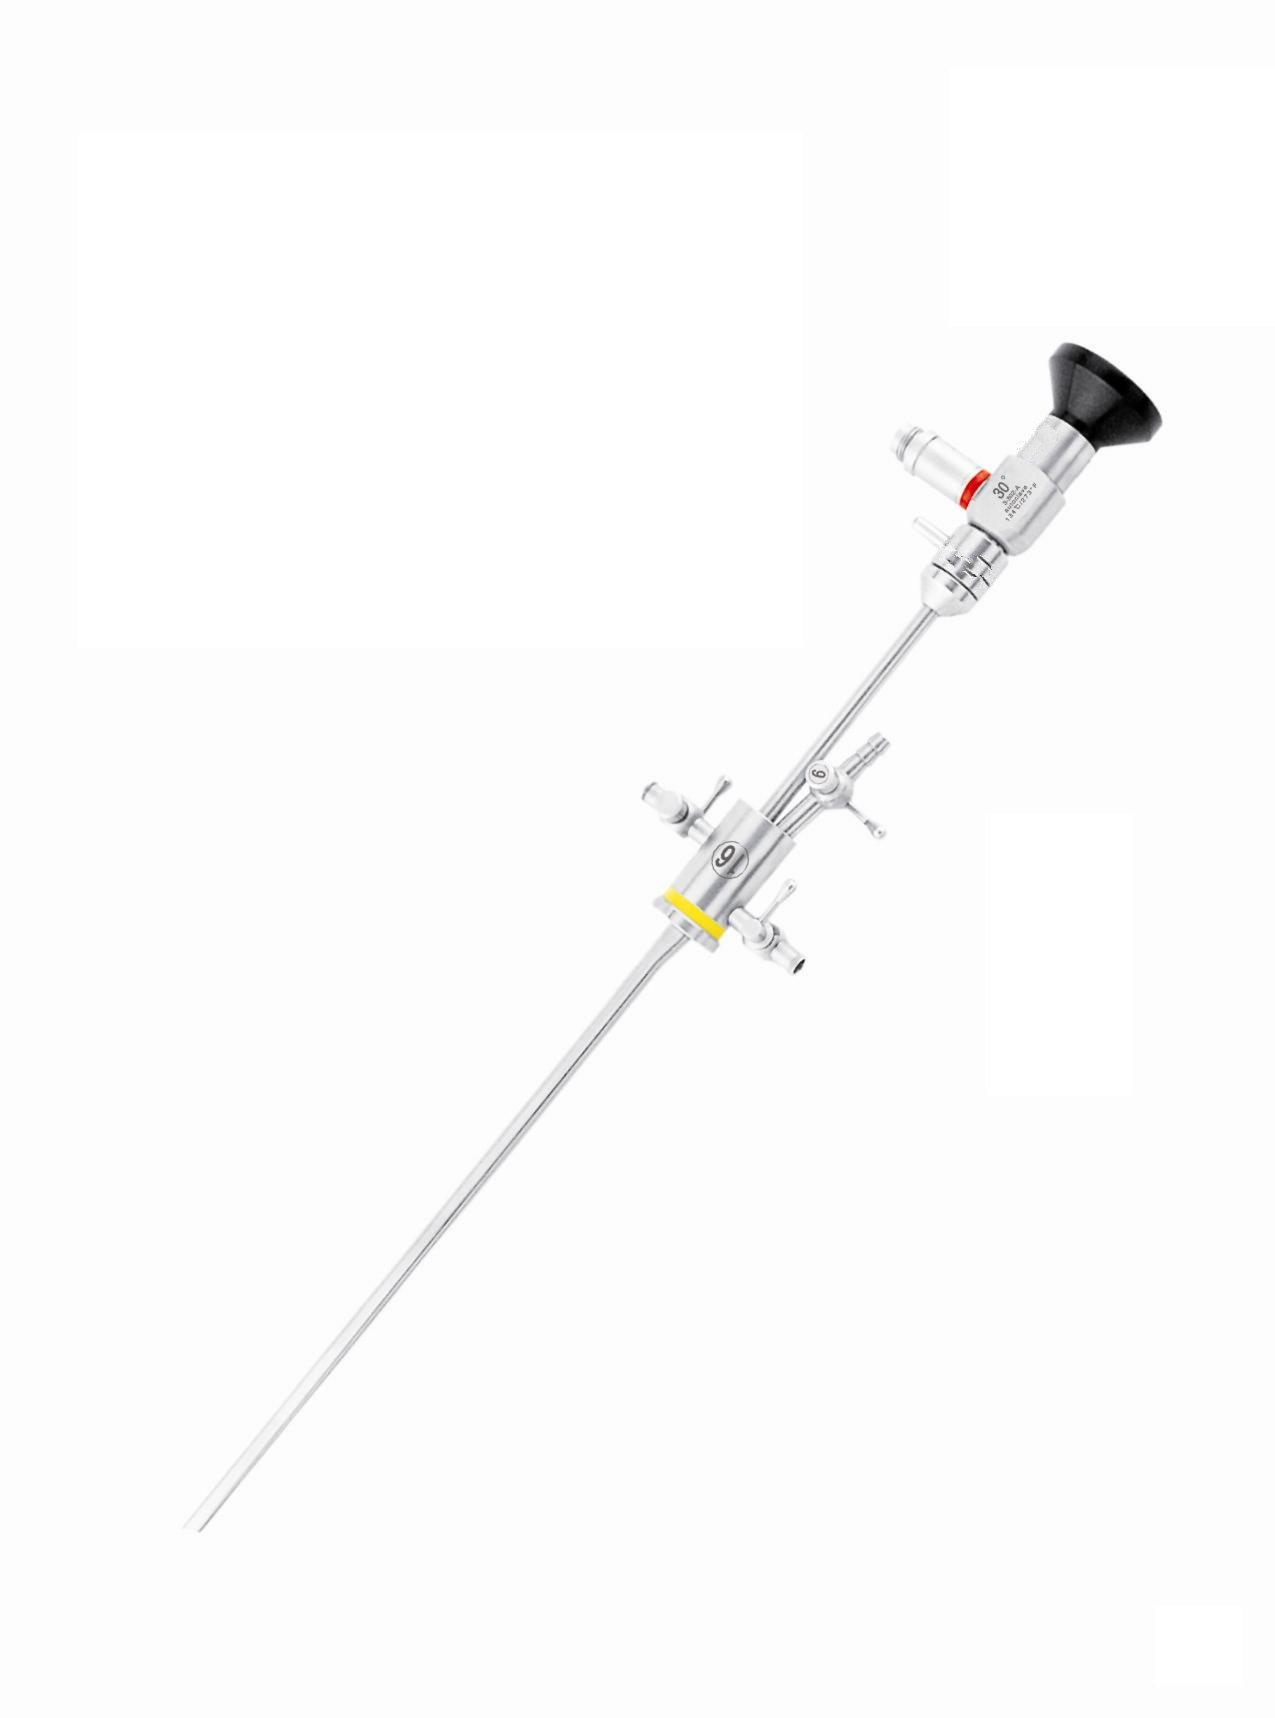 3 X 302mm Gynecology Hysteroscope with 5fr Instruments